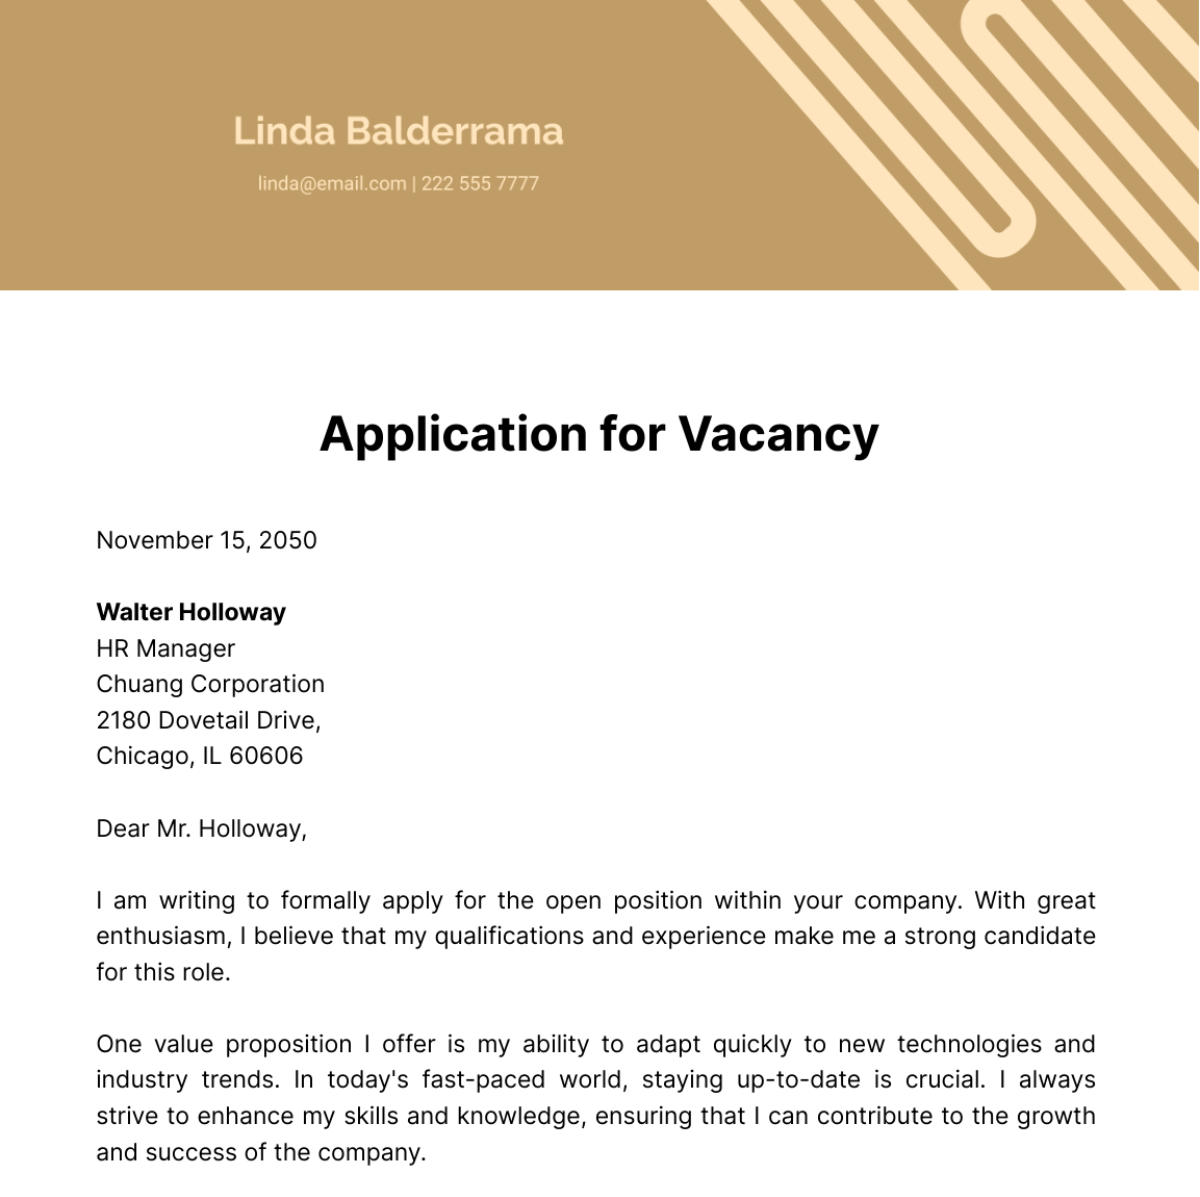 Free Application Letter for Vacancy  Template